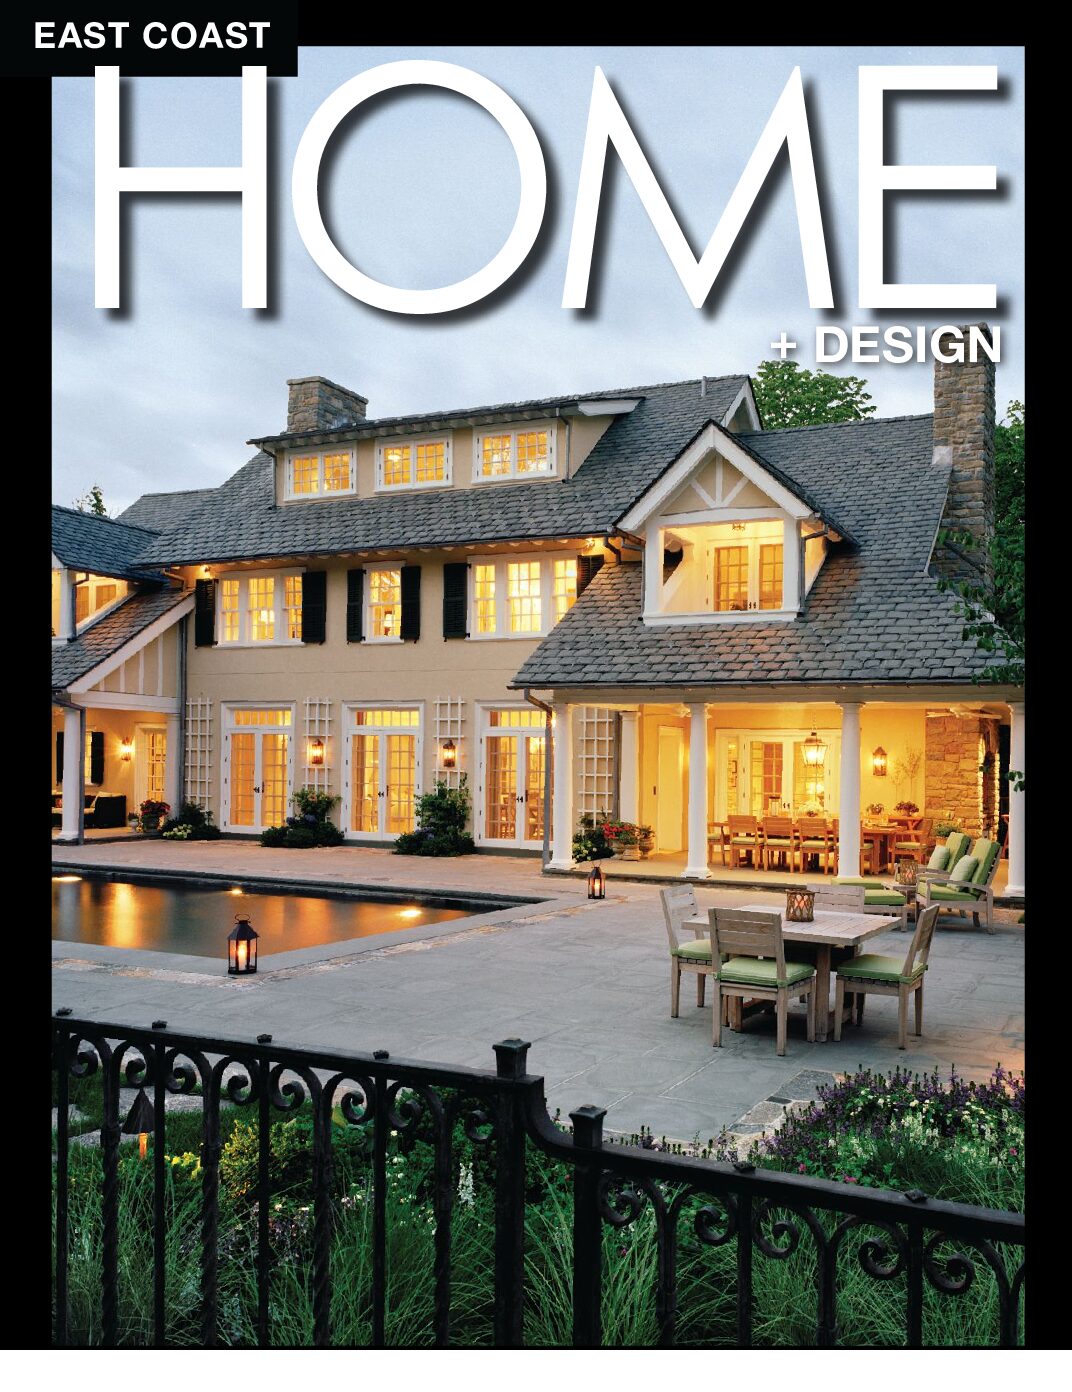 East Coast Home and Design - June 2012